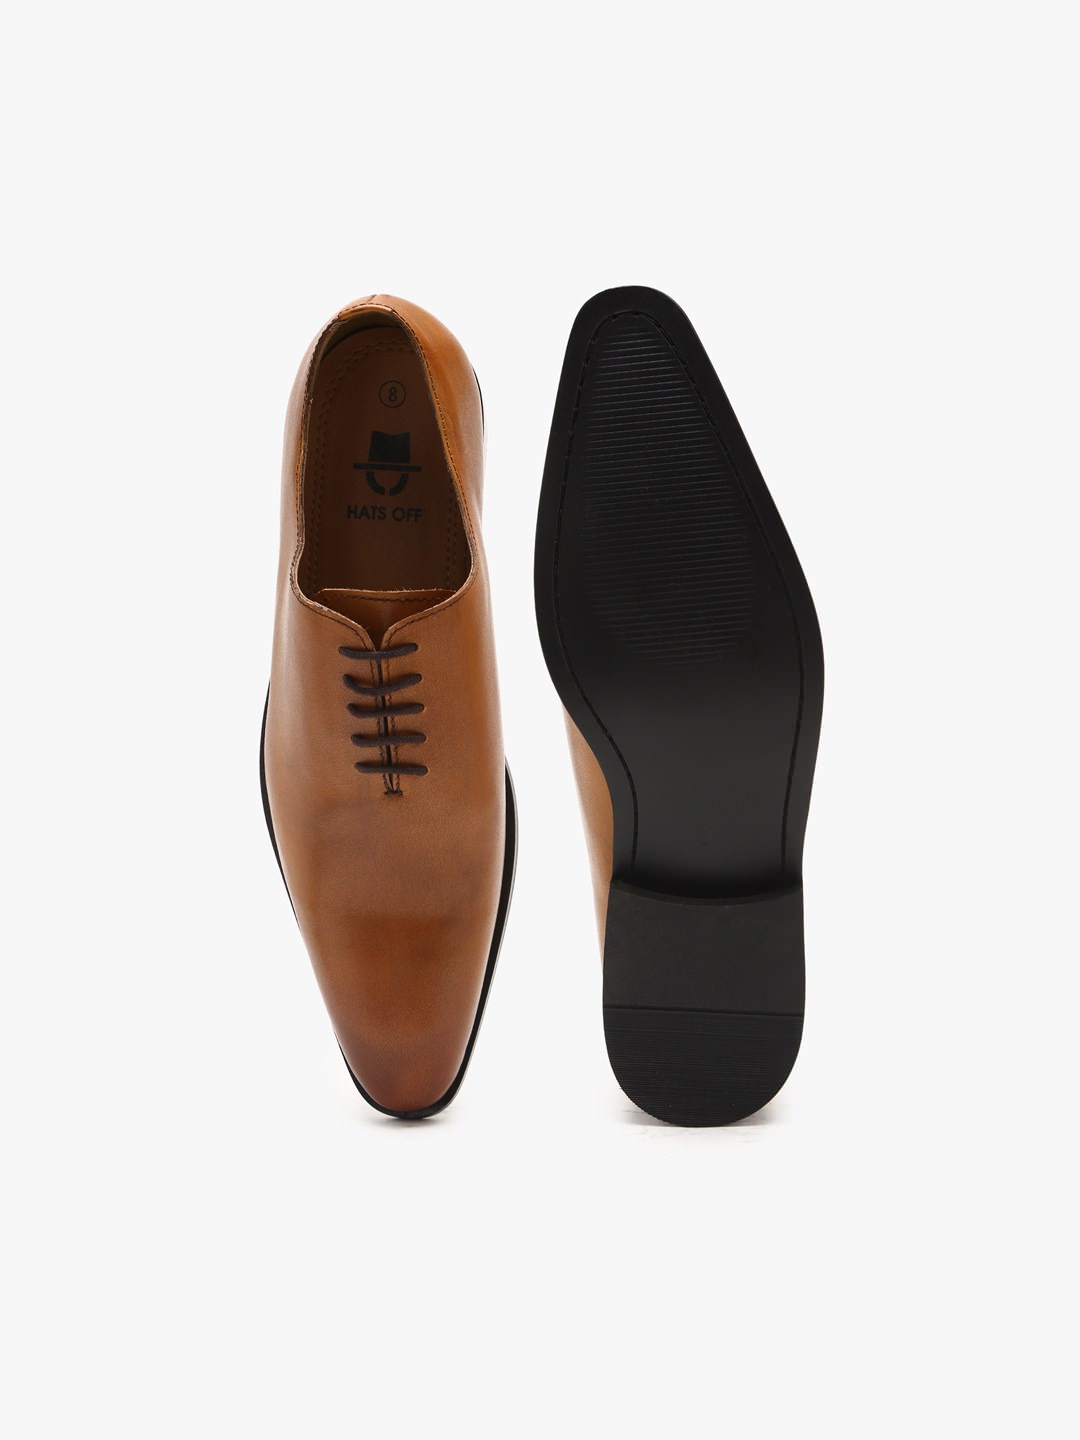 Buy Leather Tan Wholecut Oxford Shoes online In India